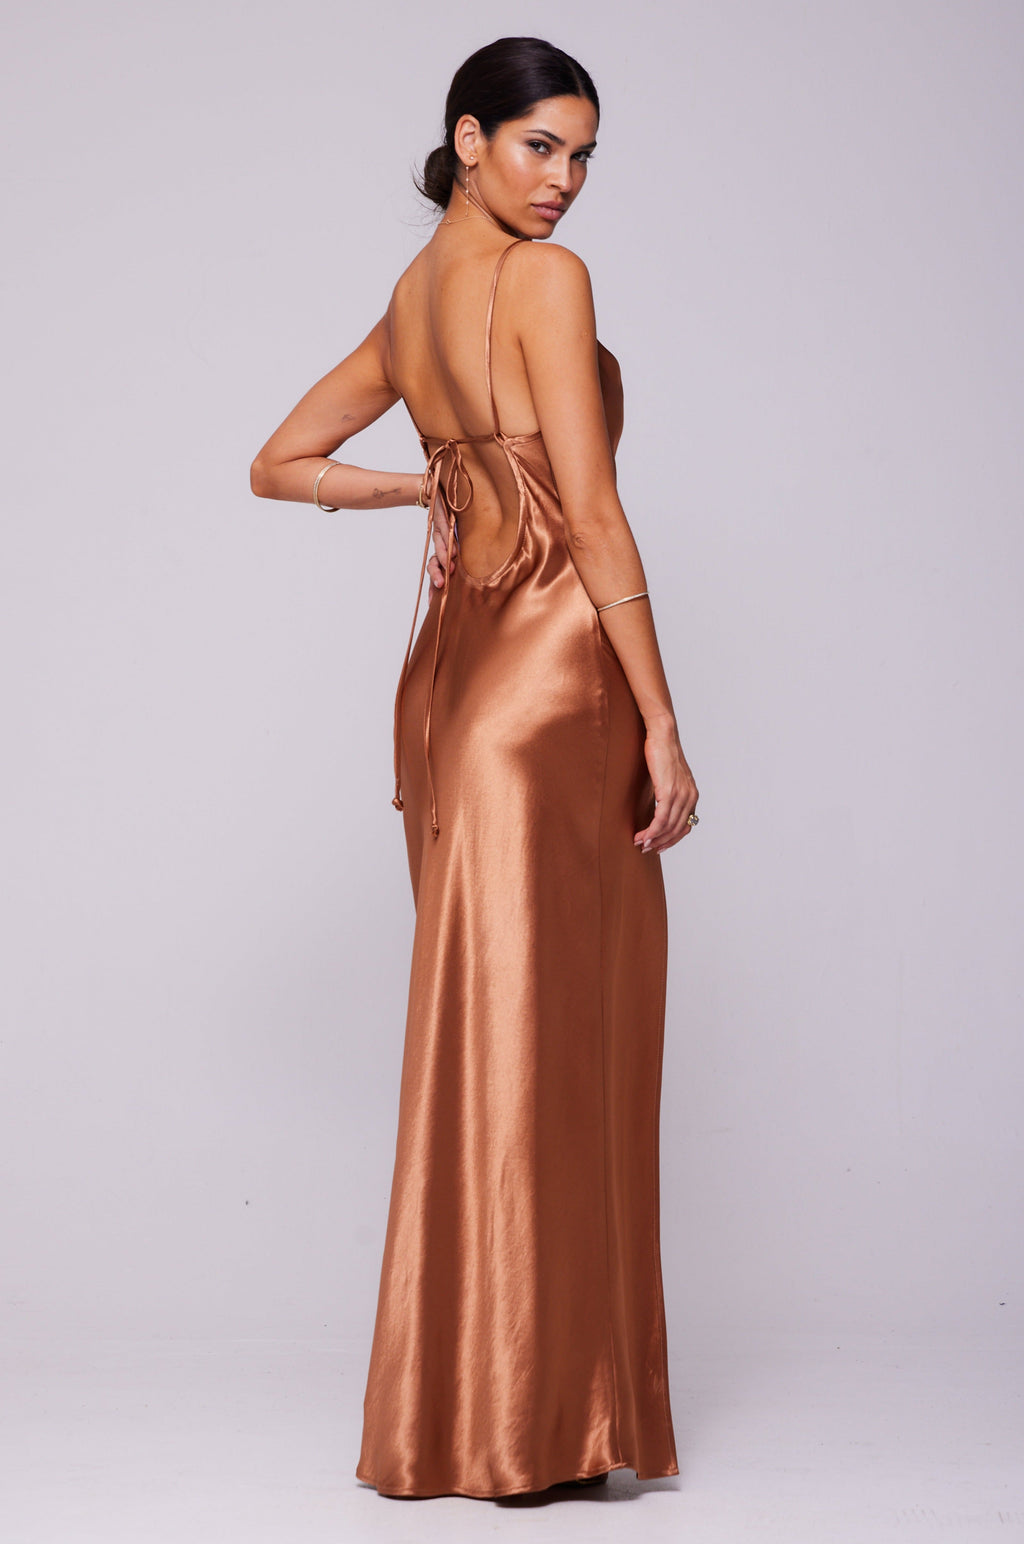 This is an image of River Slip in Copper - RESA featuring a model wearing the dress